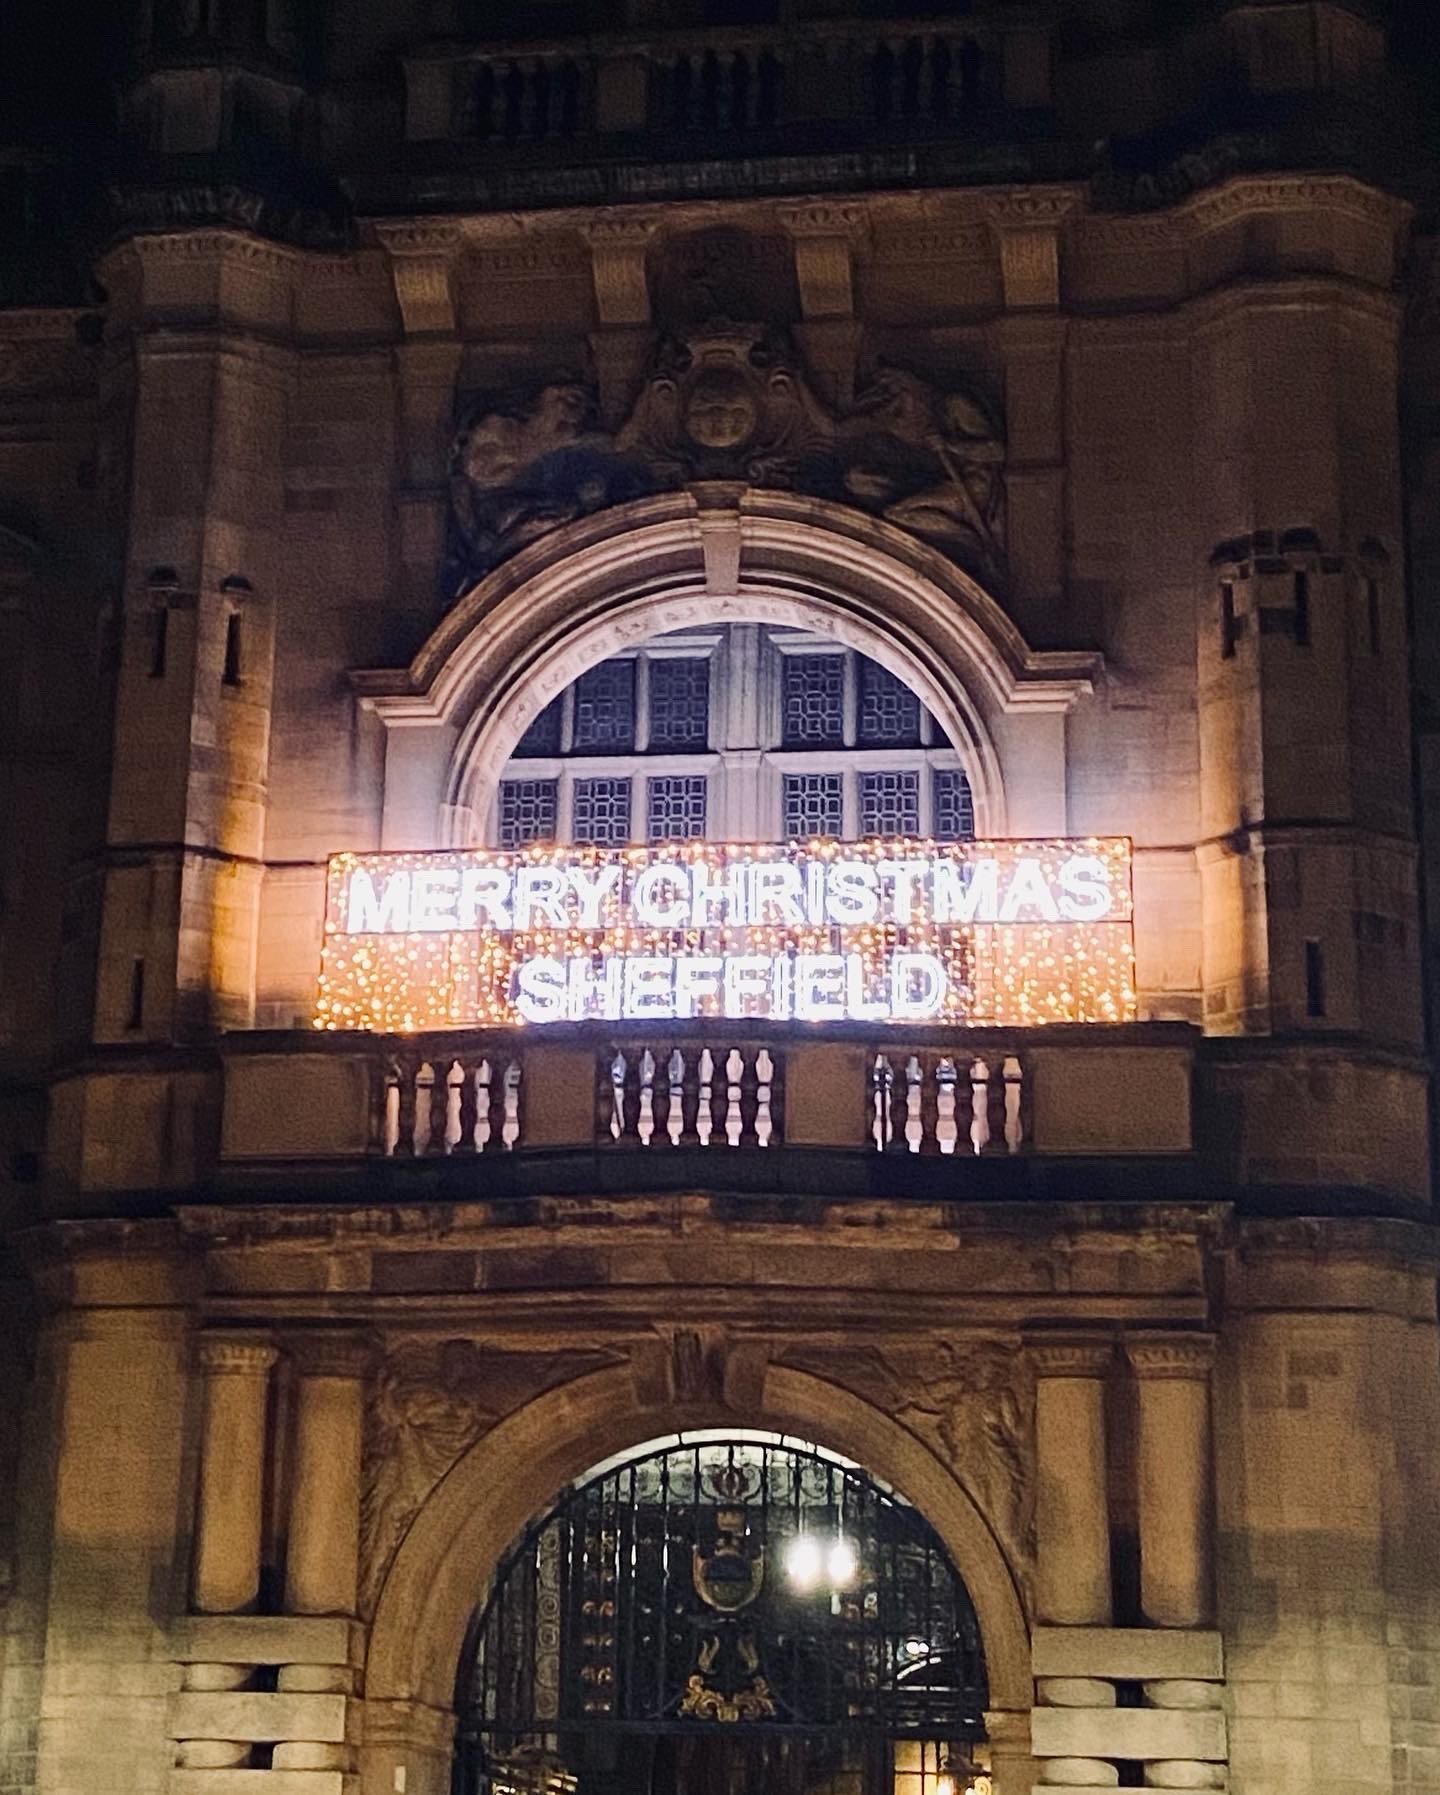 "Merry Christmas Sheffield" written in lights across the front of the Town Hall